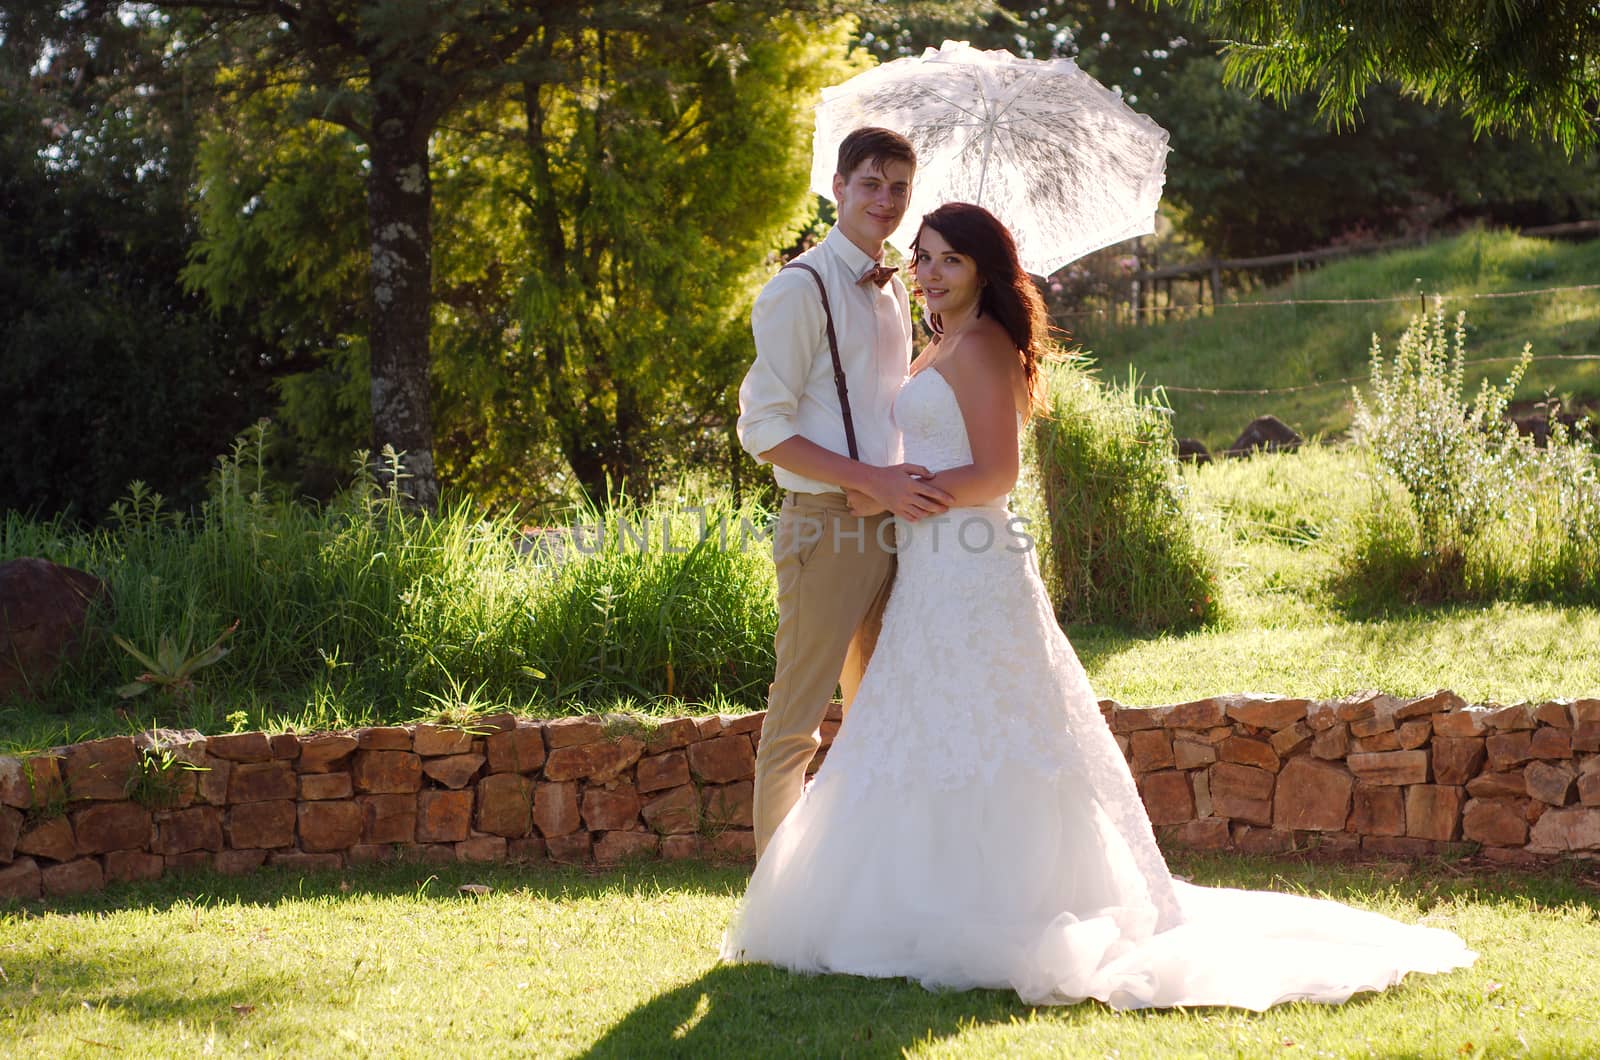 Bride and groom with parasol outside garden wedding ceremony